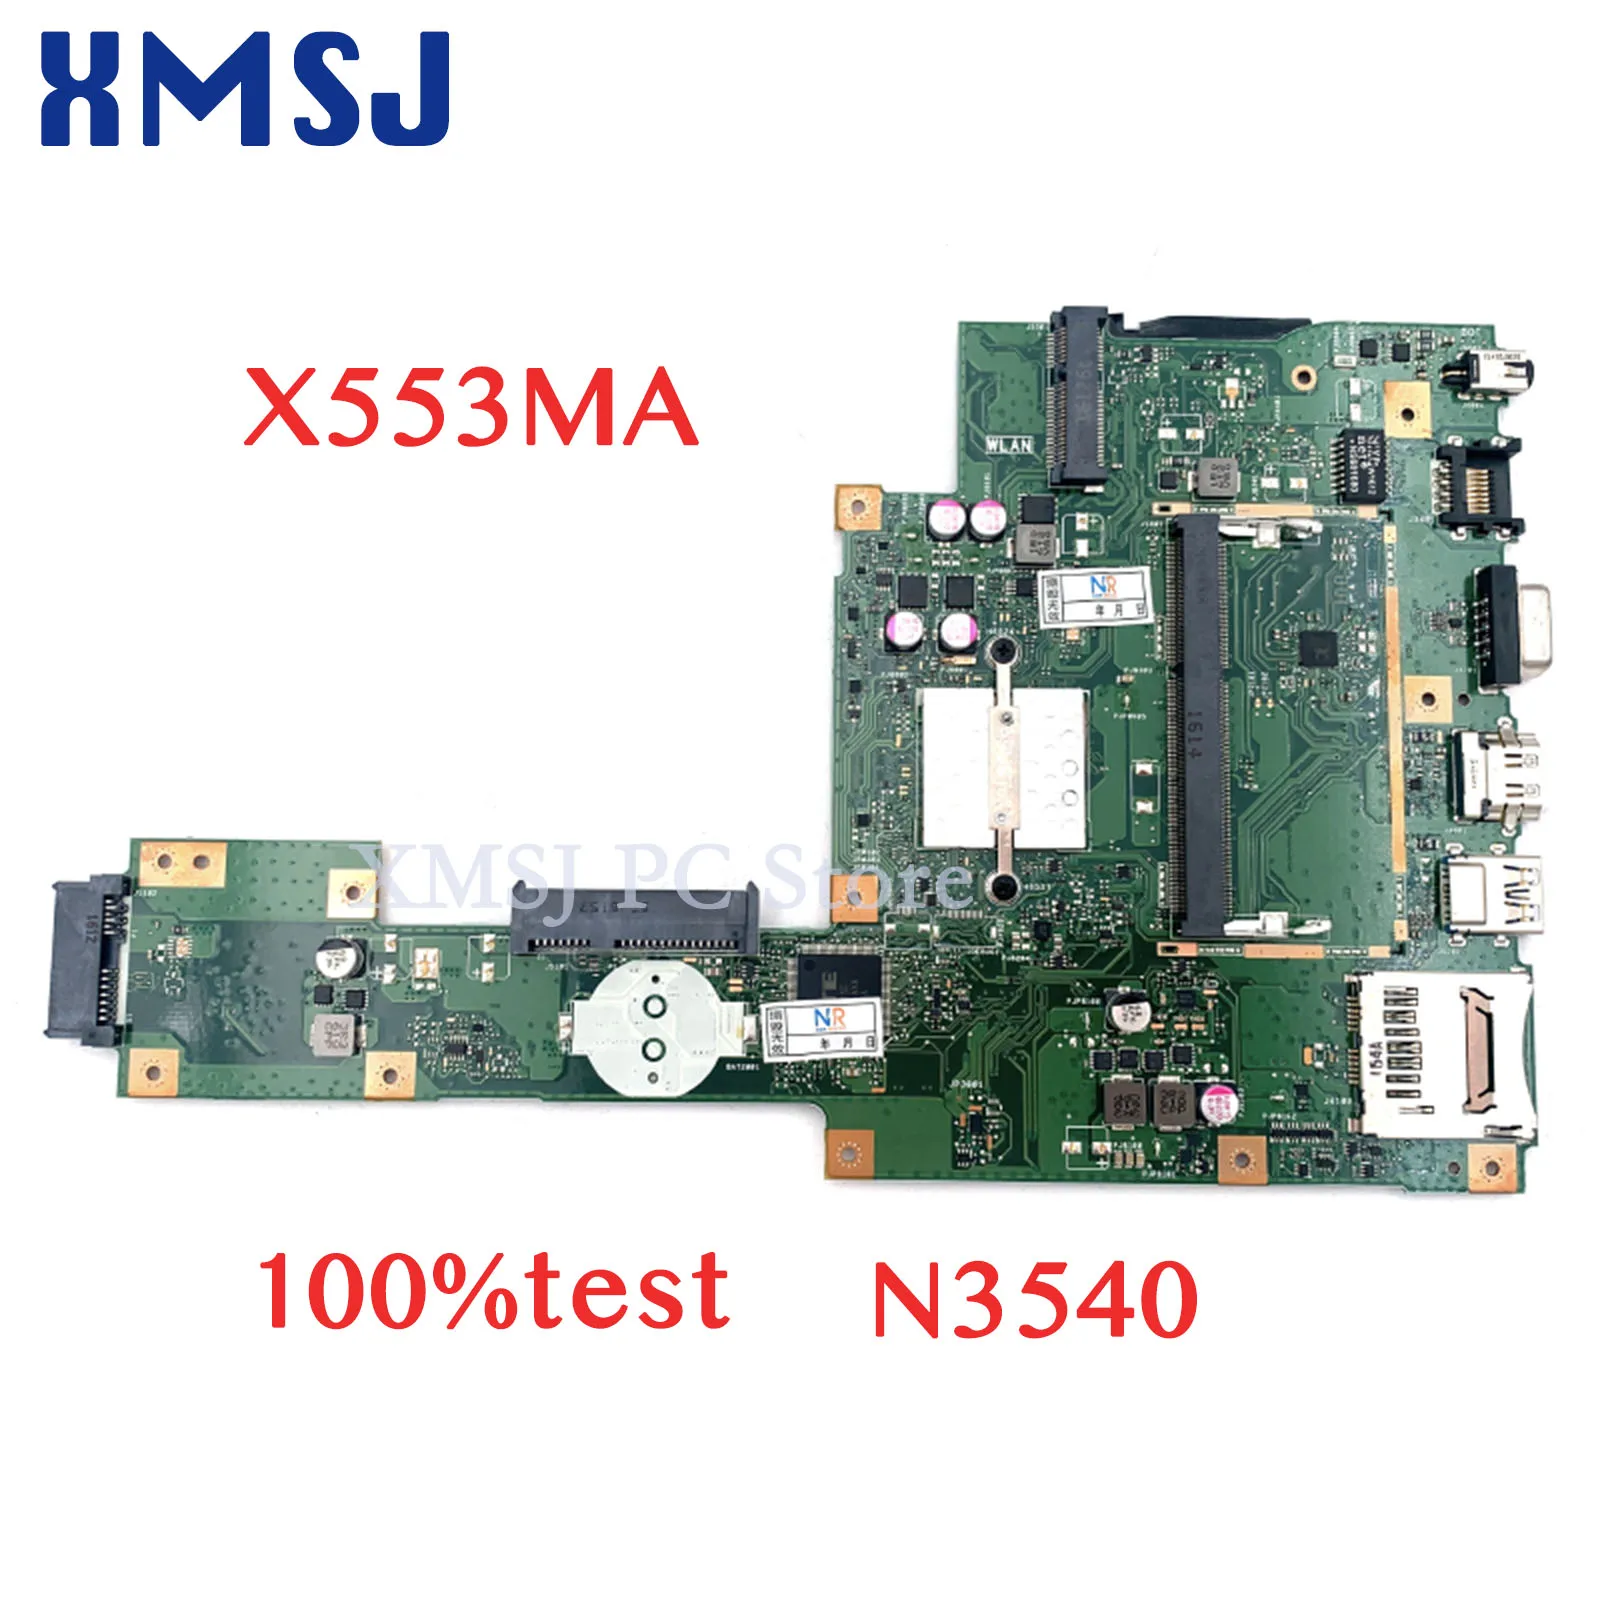 XMSJ For ASUS X553MA PN:60NB04X0-MB1900 Laptop Motherboard With N3540 Processor onboard DDR3 Onboard DDR3 Main Board Full Test